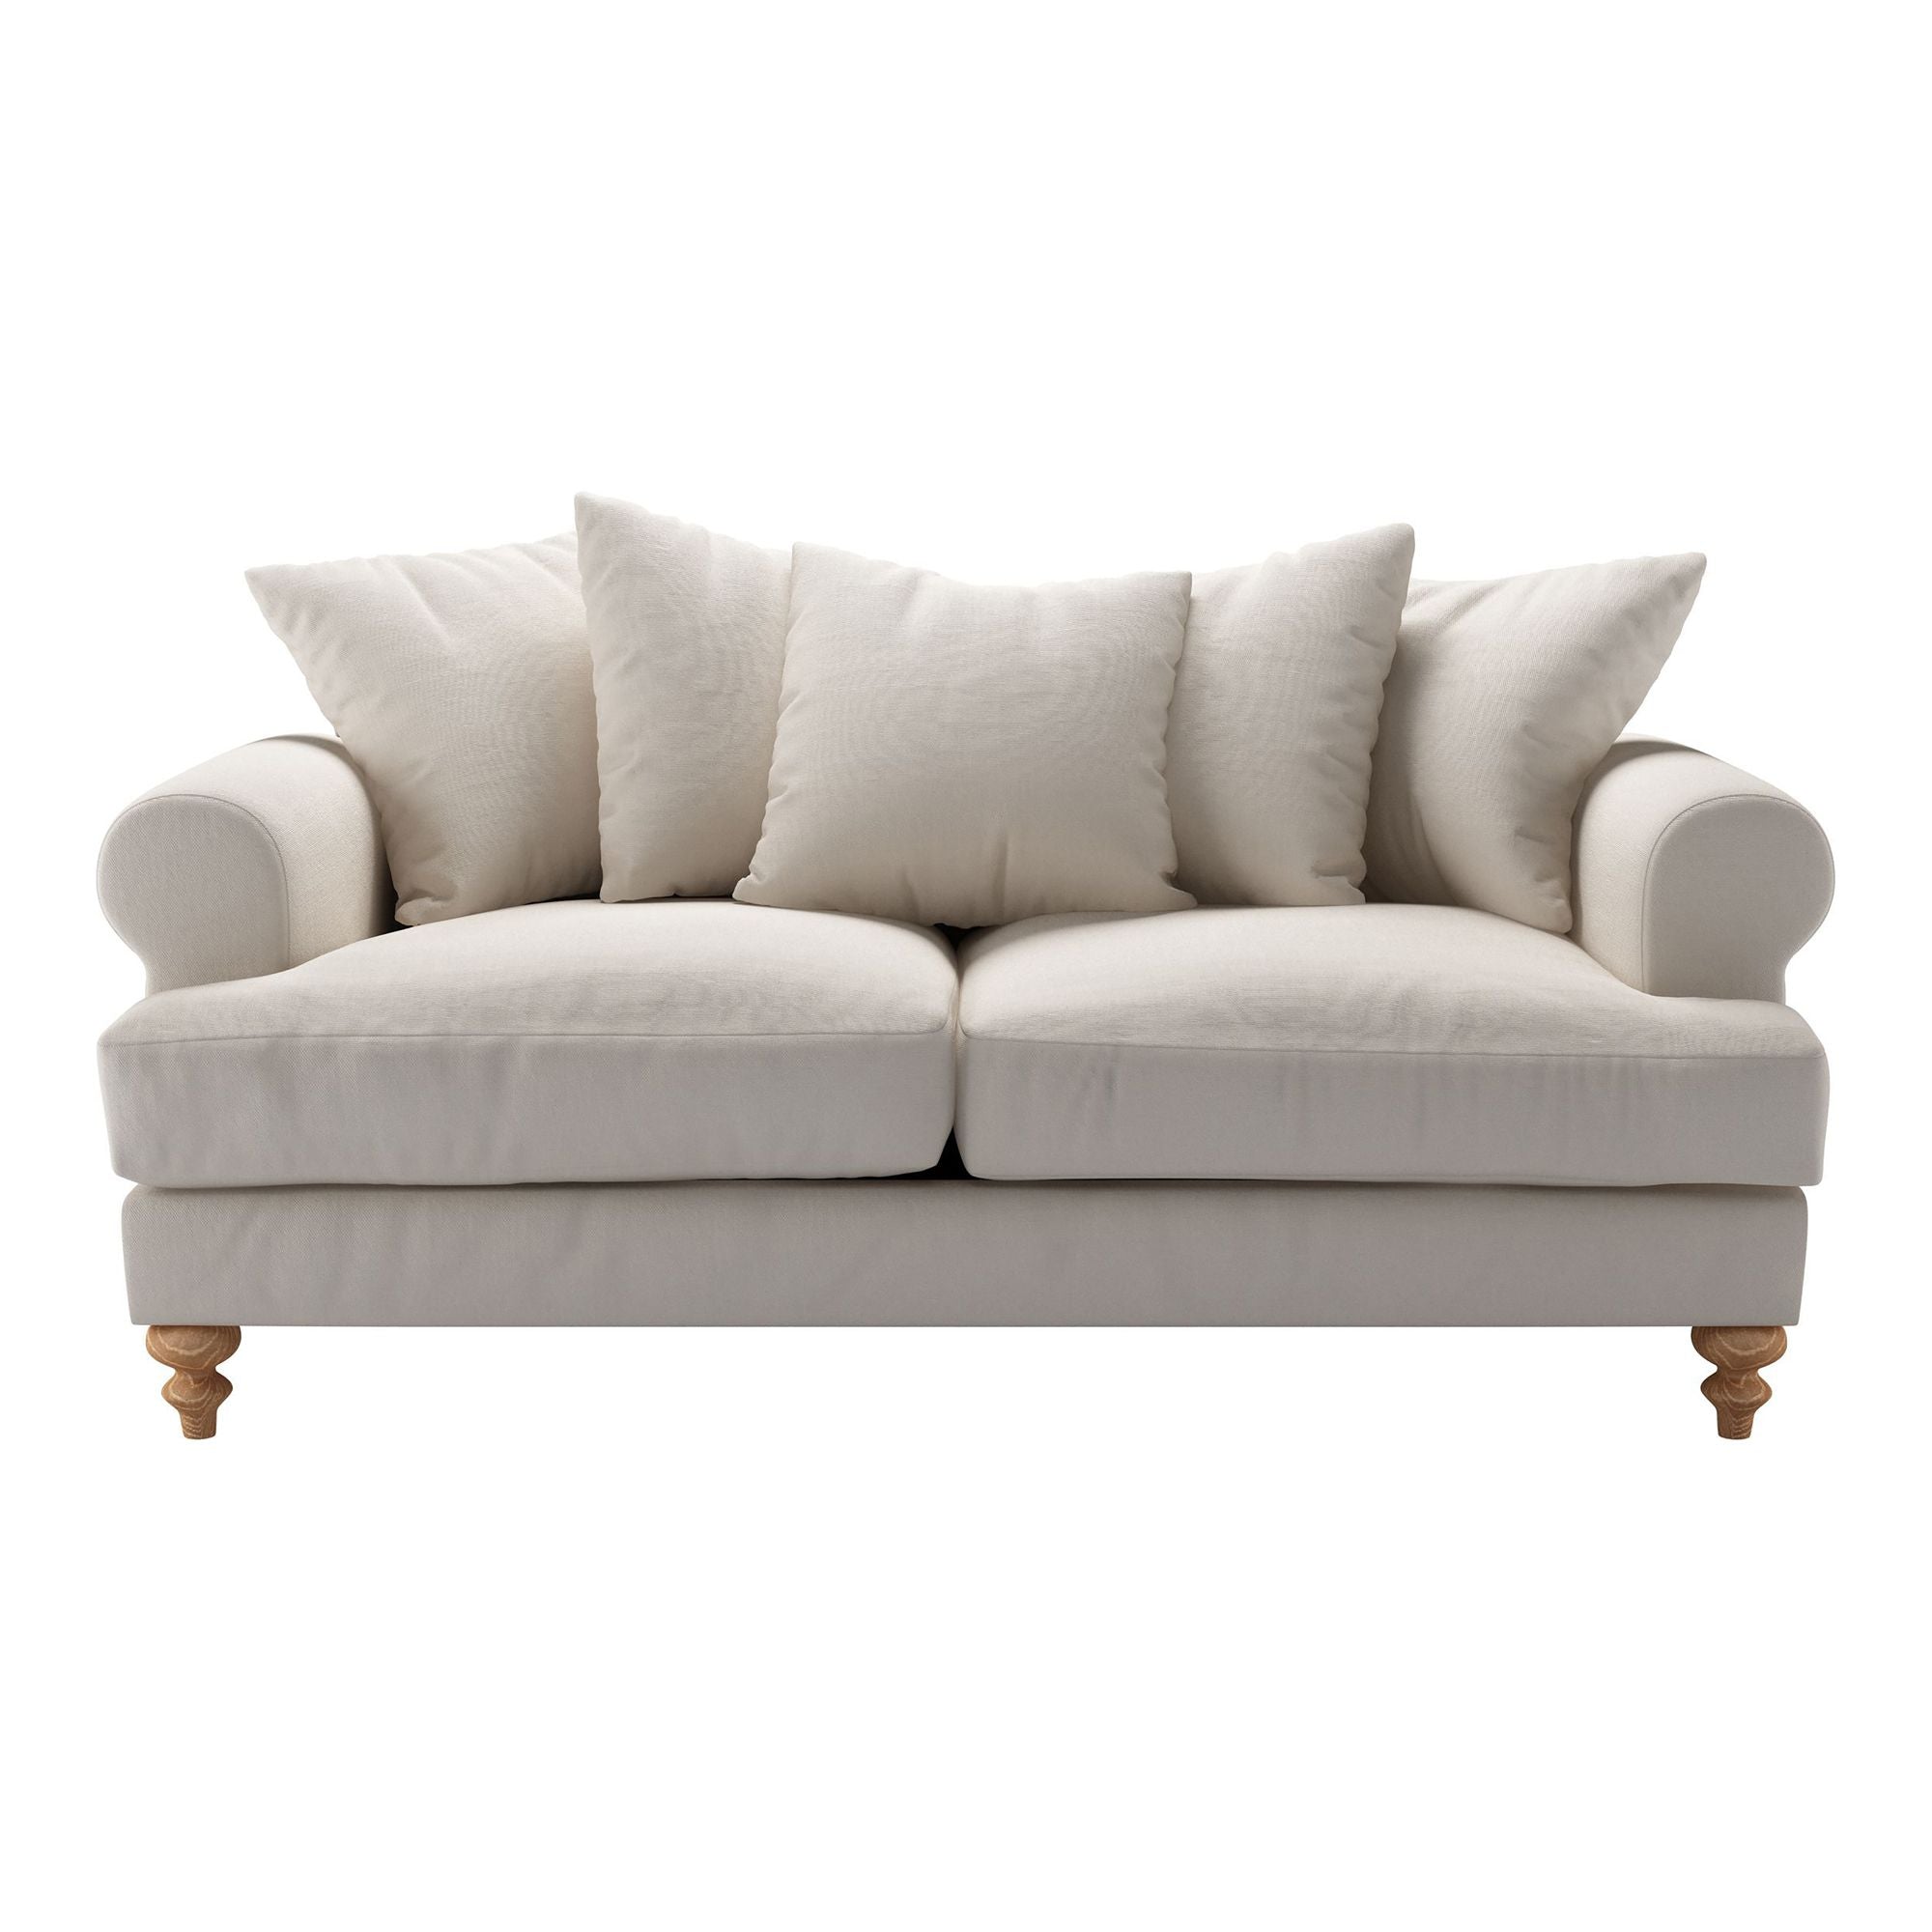 Teddy Brushed Linen Cotton Sofa - 2.5 Seater